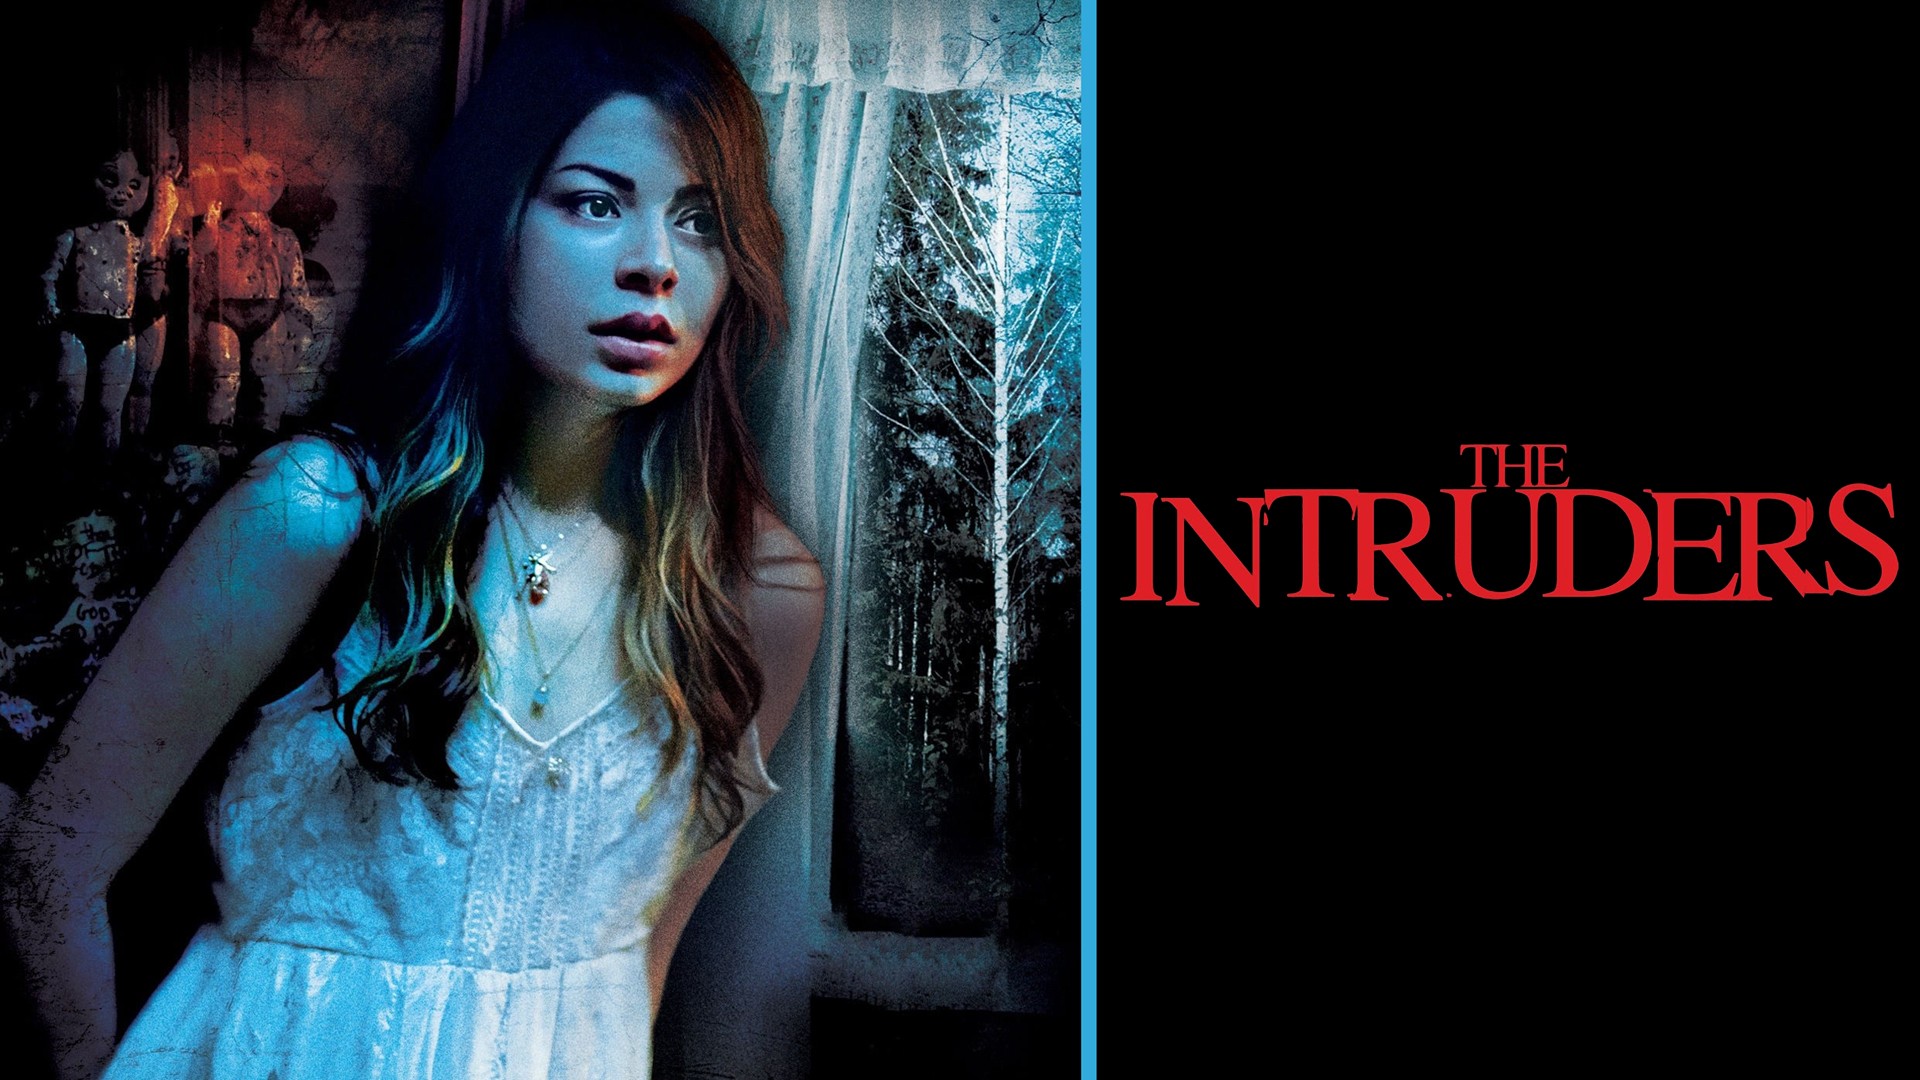 Intruders Movie Review